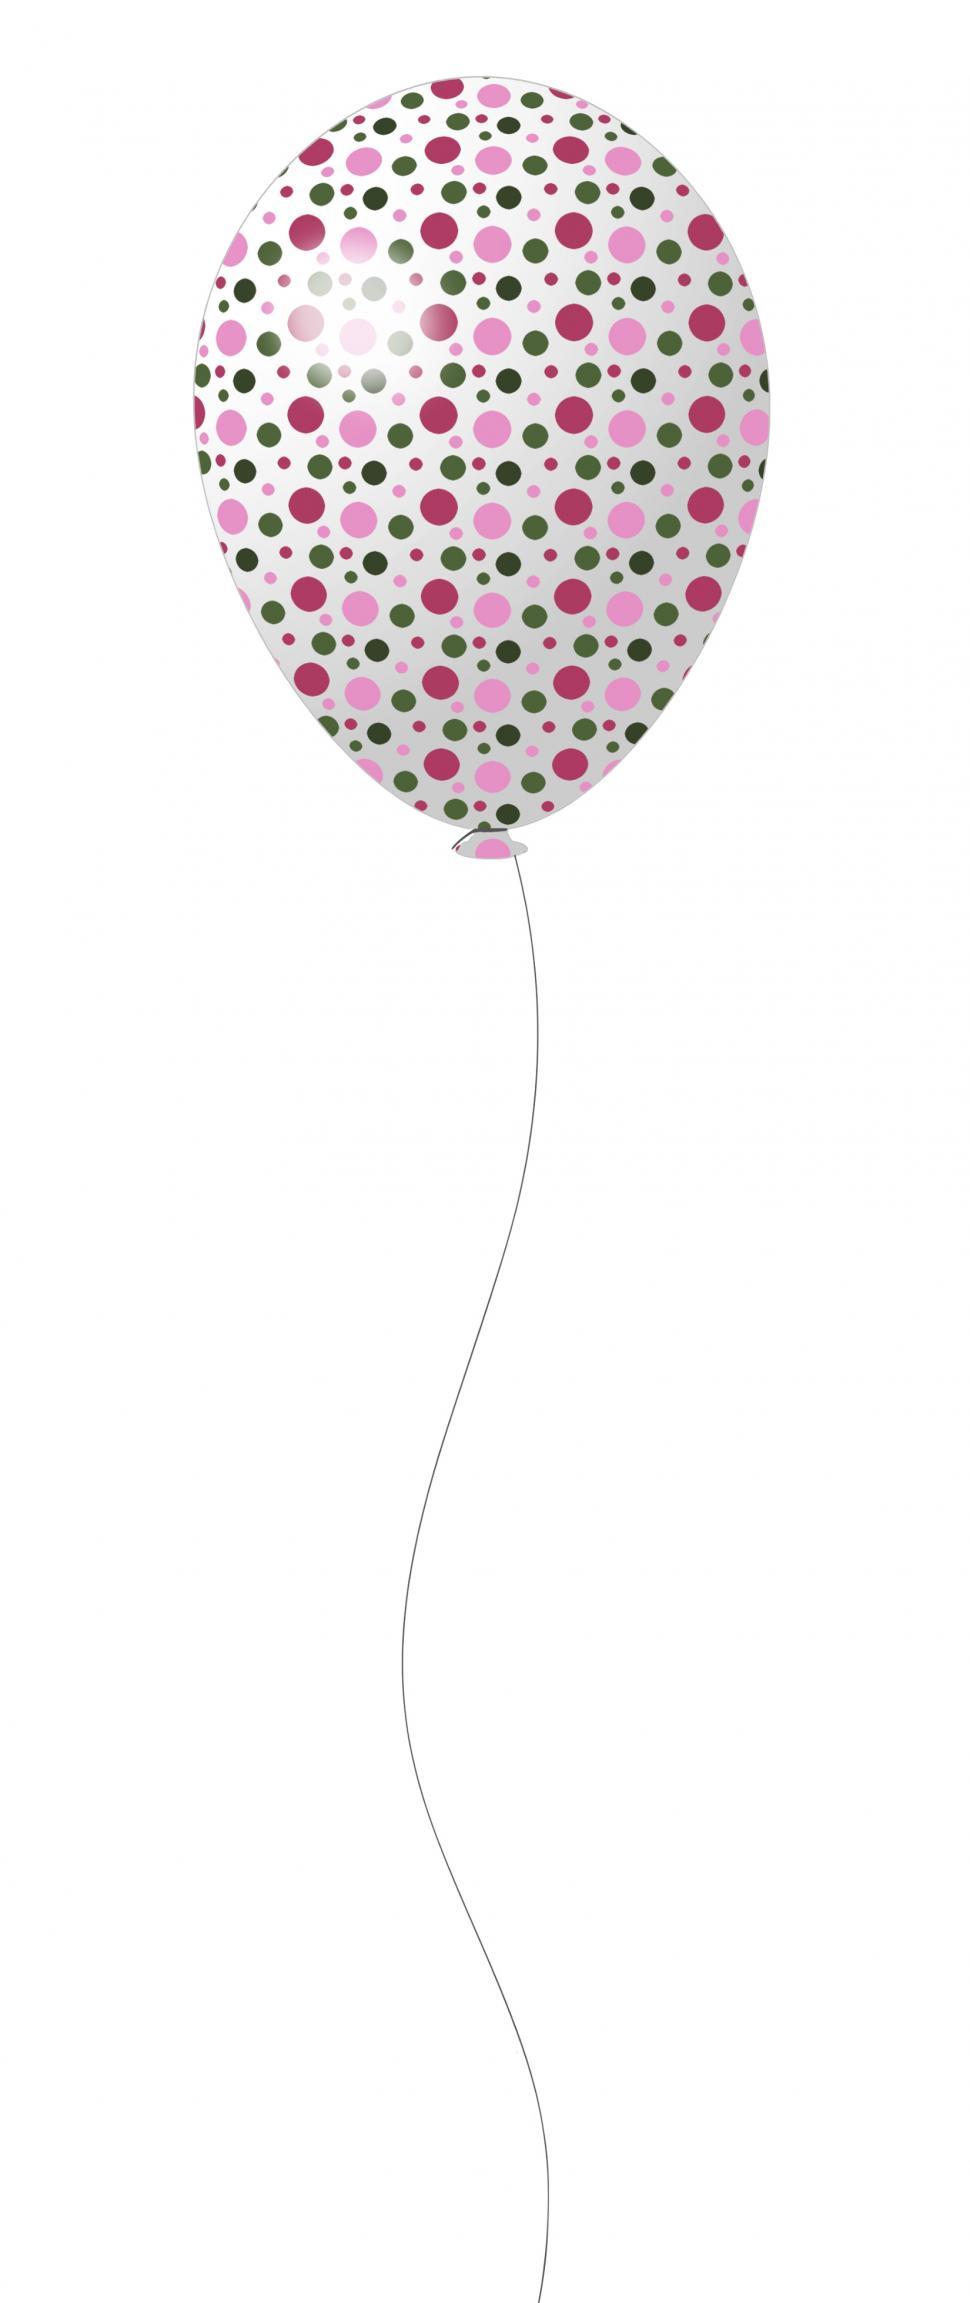 Free Image of White Balloon with Colorful Dots  